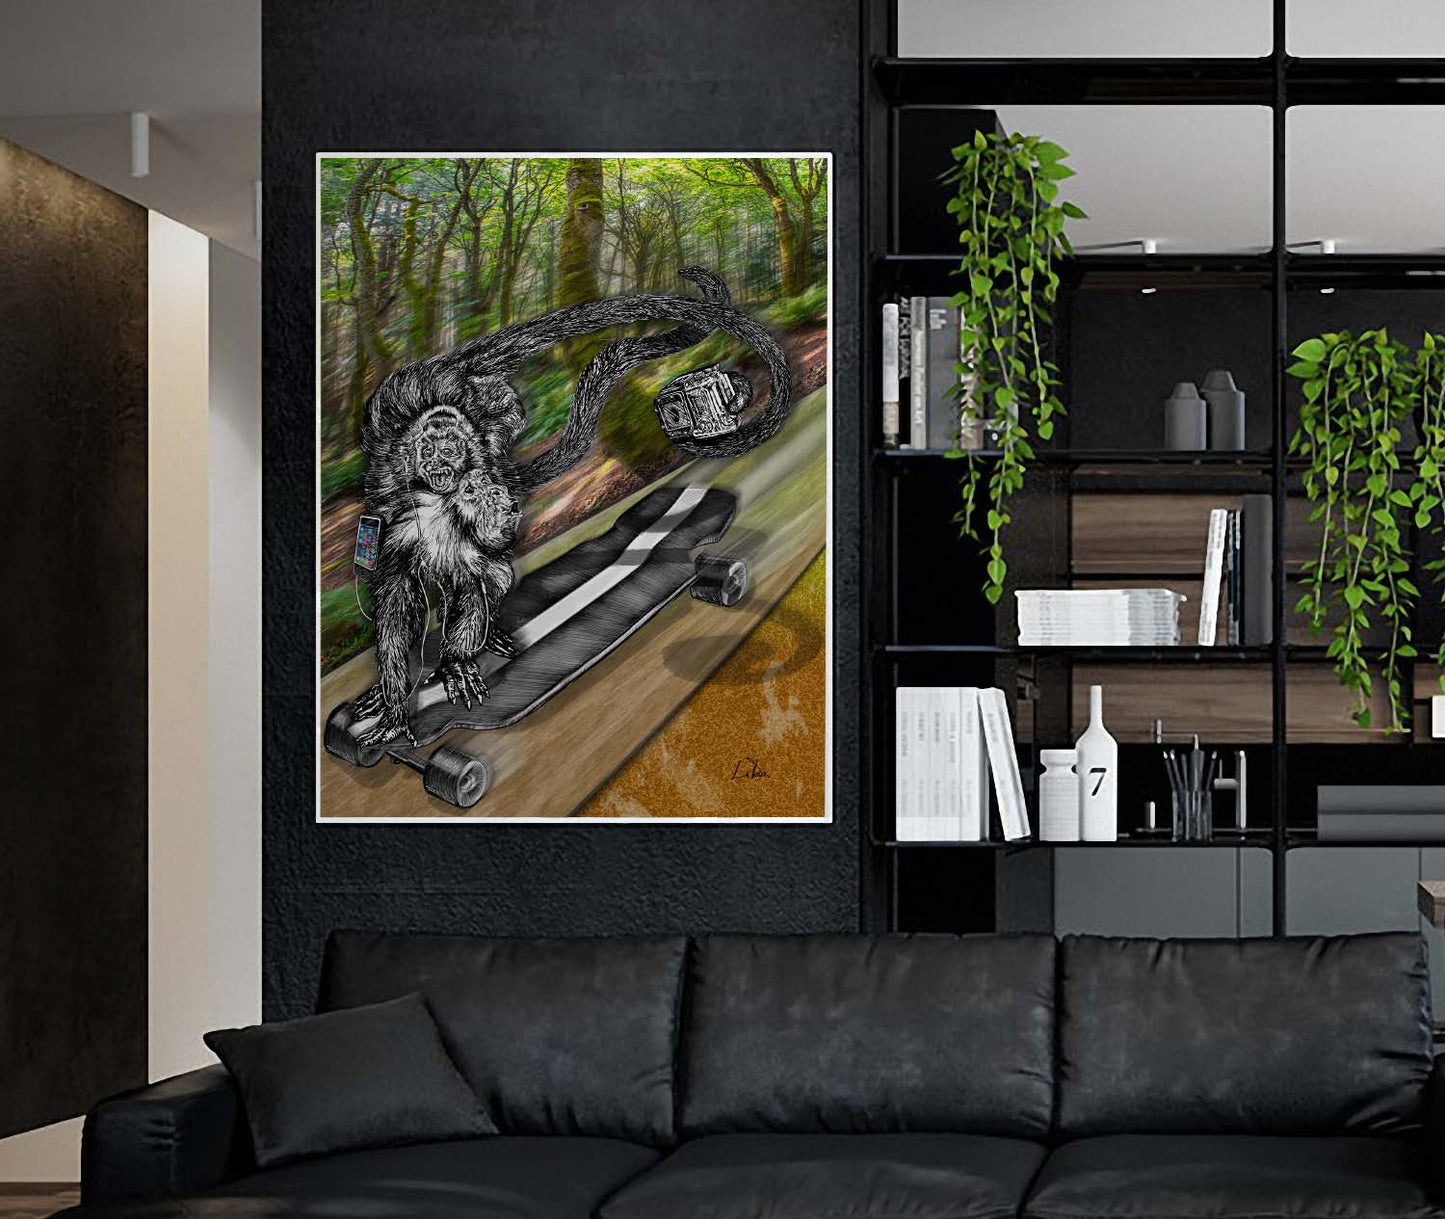 Simian Skate Selfie art by Doug LaRue large print on a black wall behind a black suede leather couch